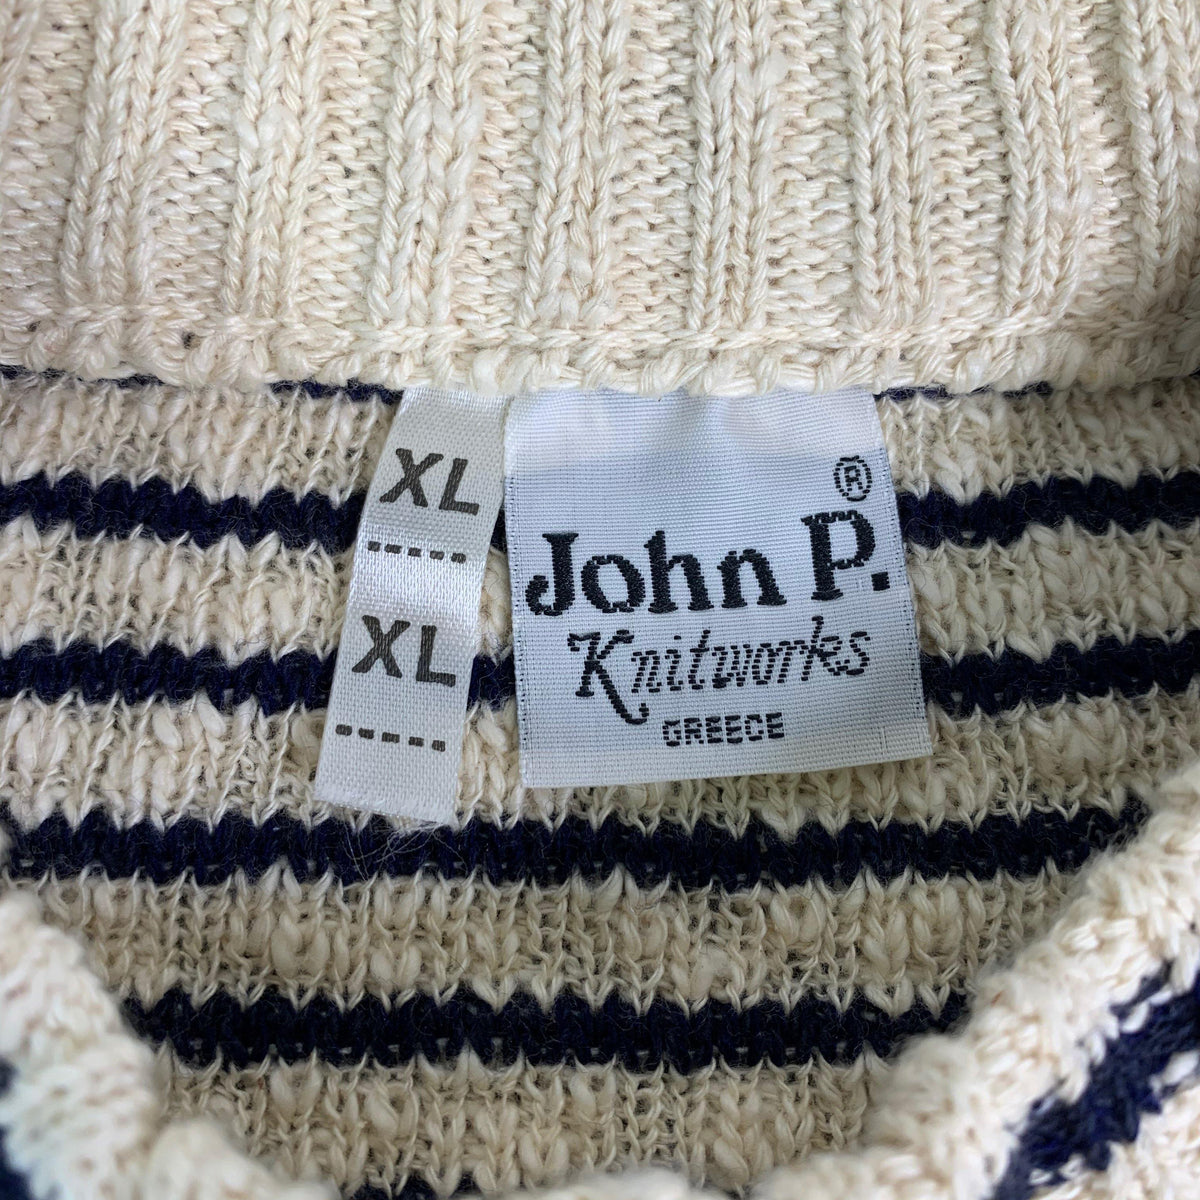 Vintage Made In Greece John P. &quot;Striped&quot; Knit - jointcustodydc